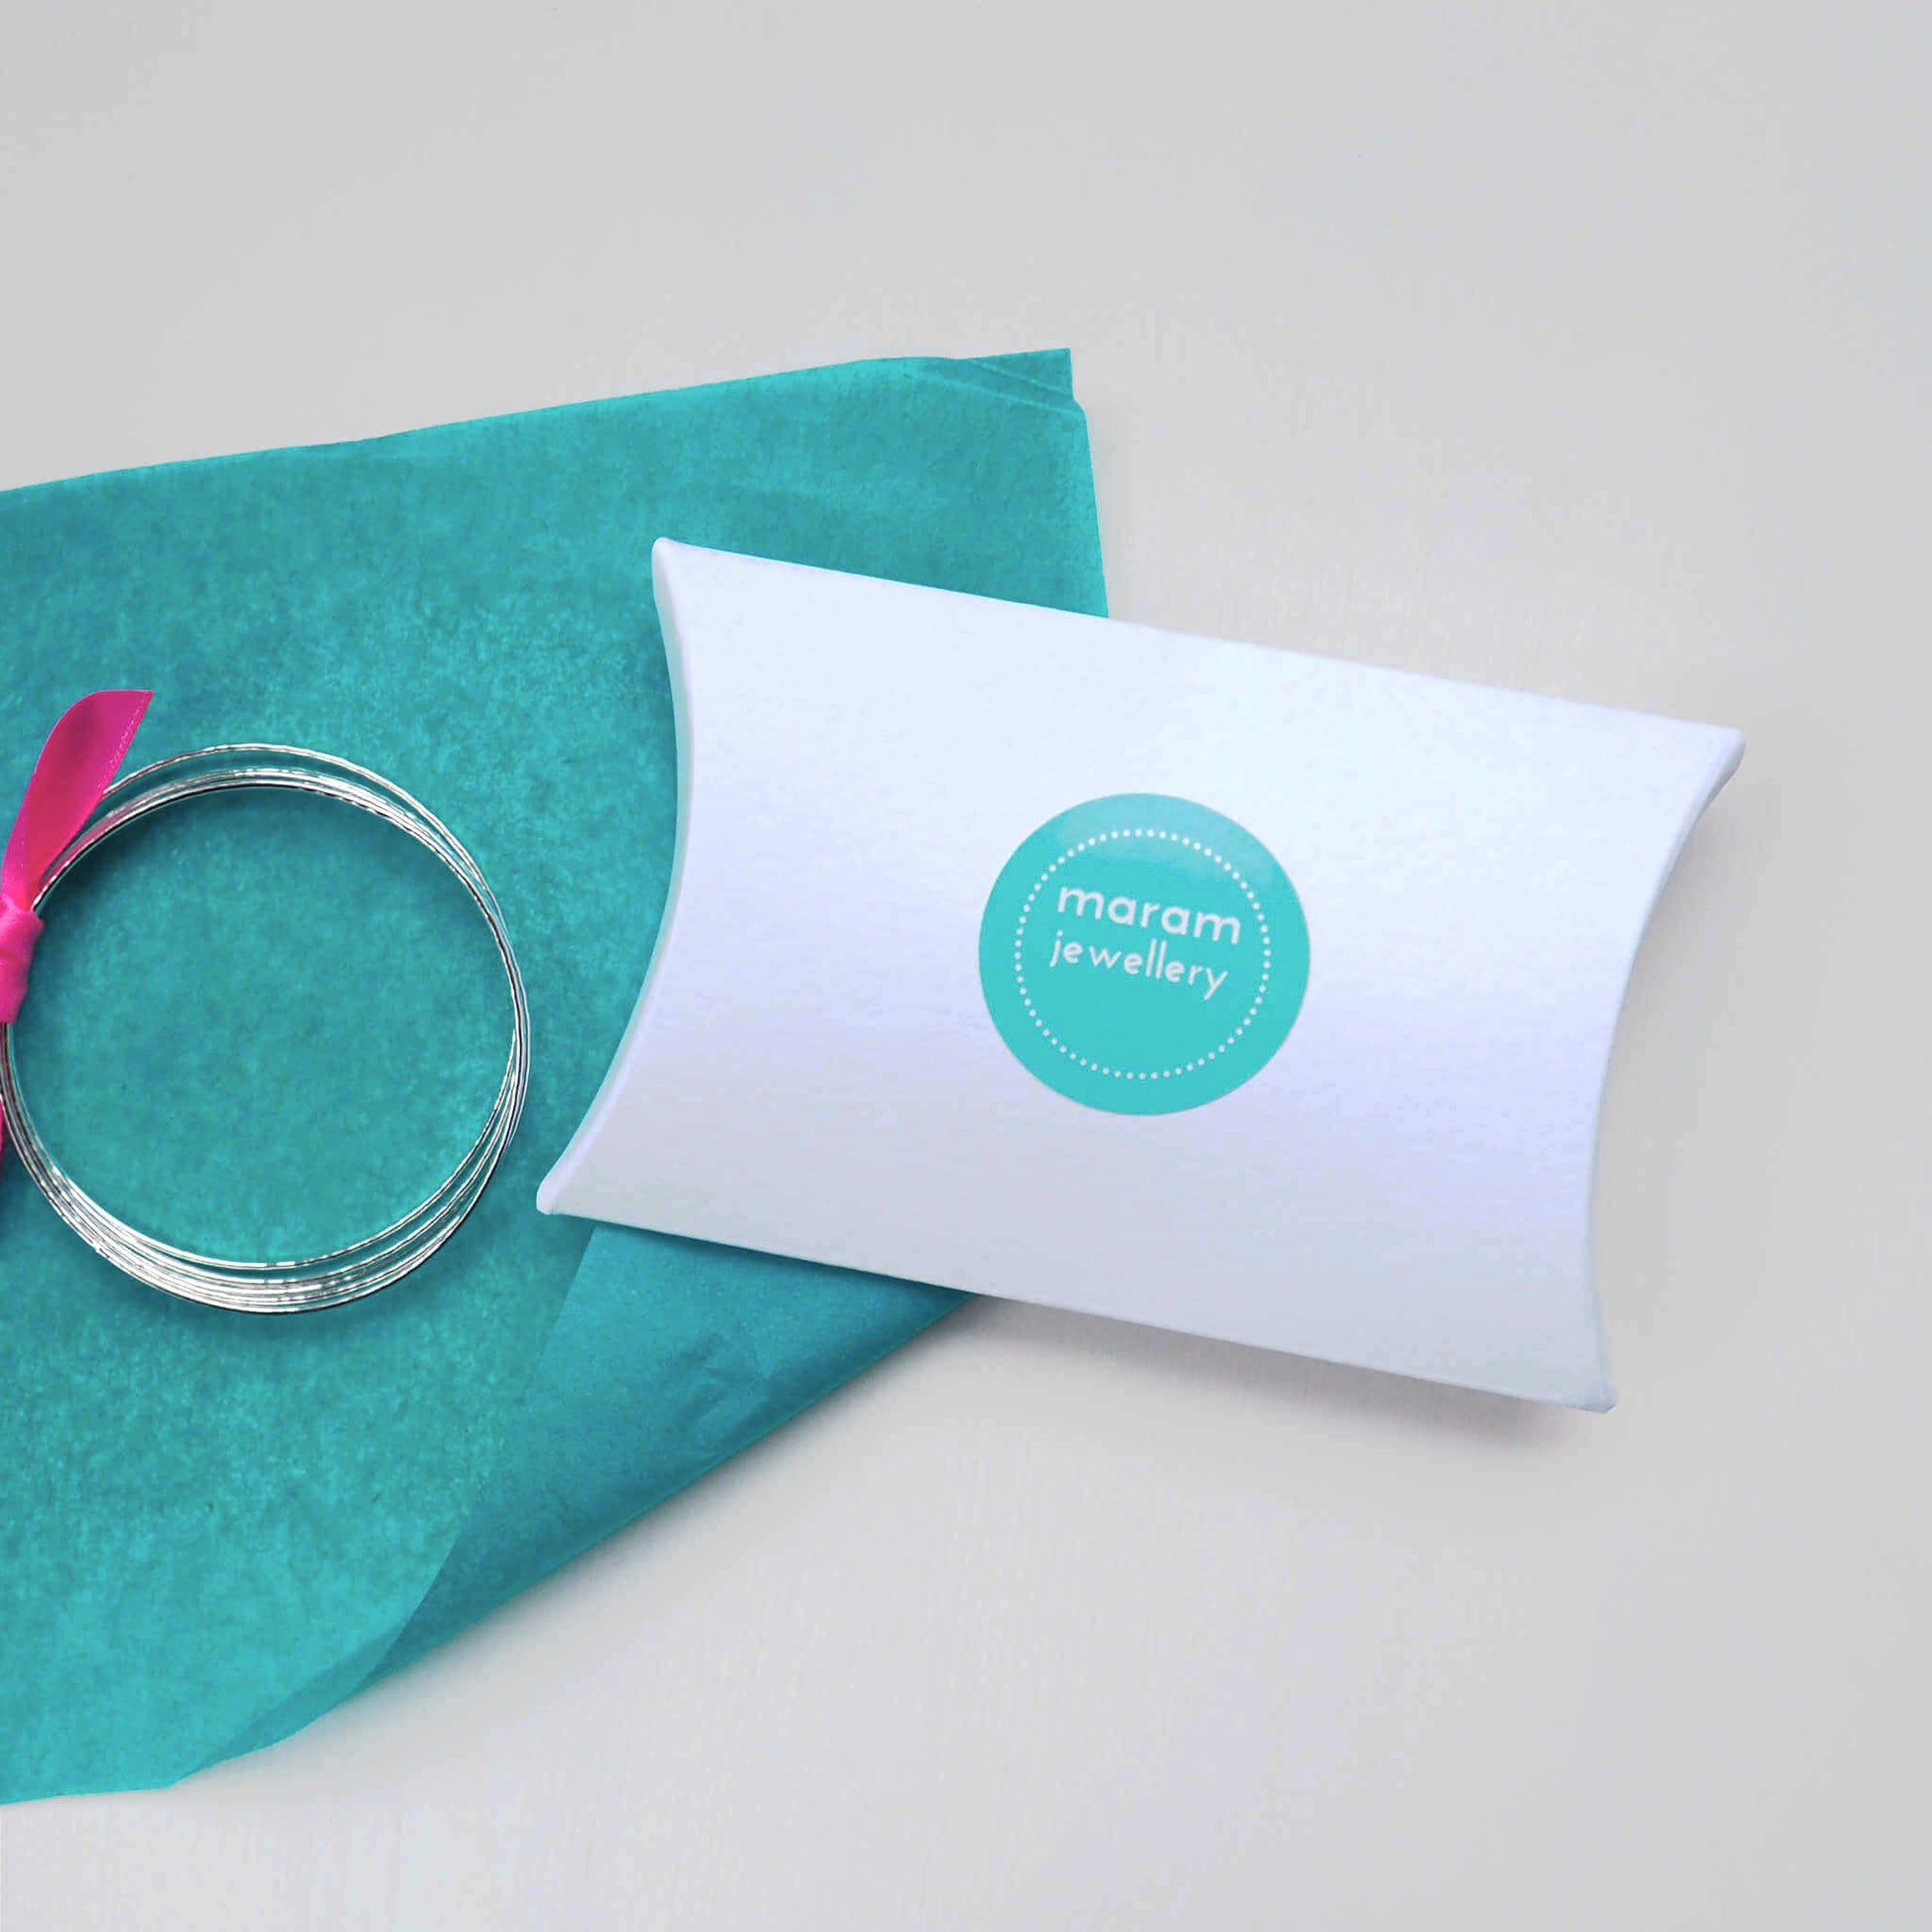 maram jewellery simple pillow box packing, a white luxury card pillow box with maram jewellery logo in turquoise with matching tissue